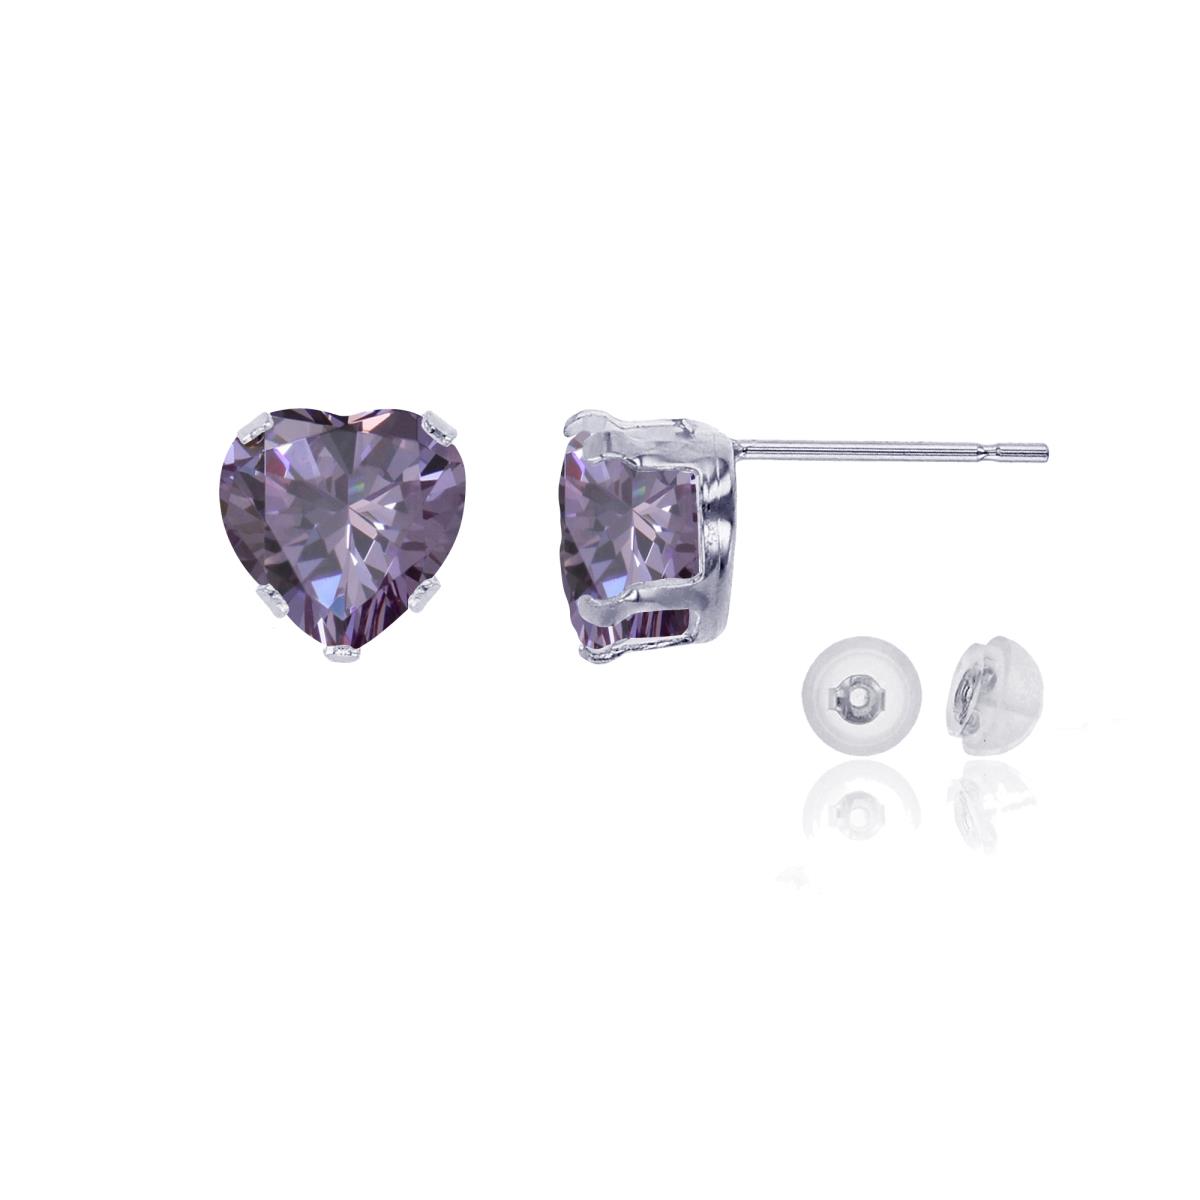 10K White Gold 5x5mm Heart Amethyst Stud Earring with Silicone Back